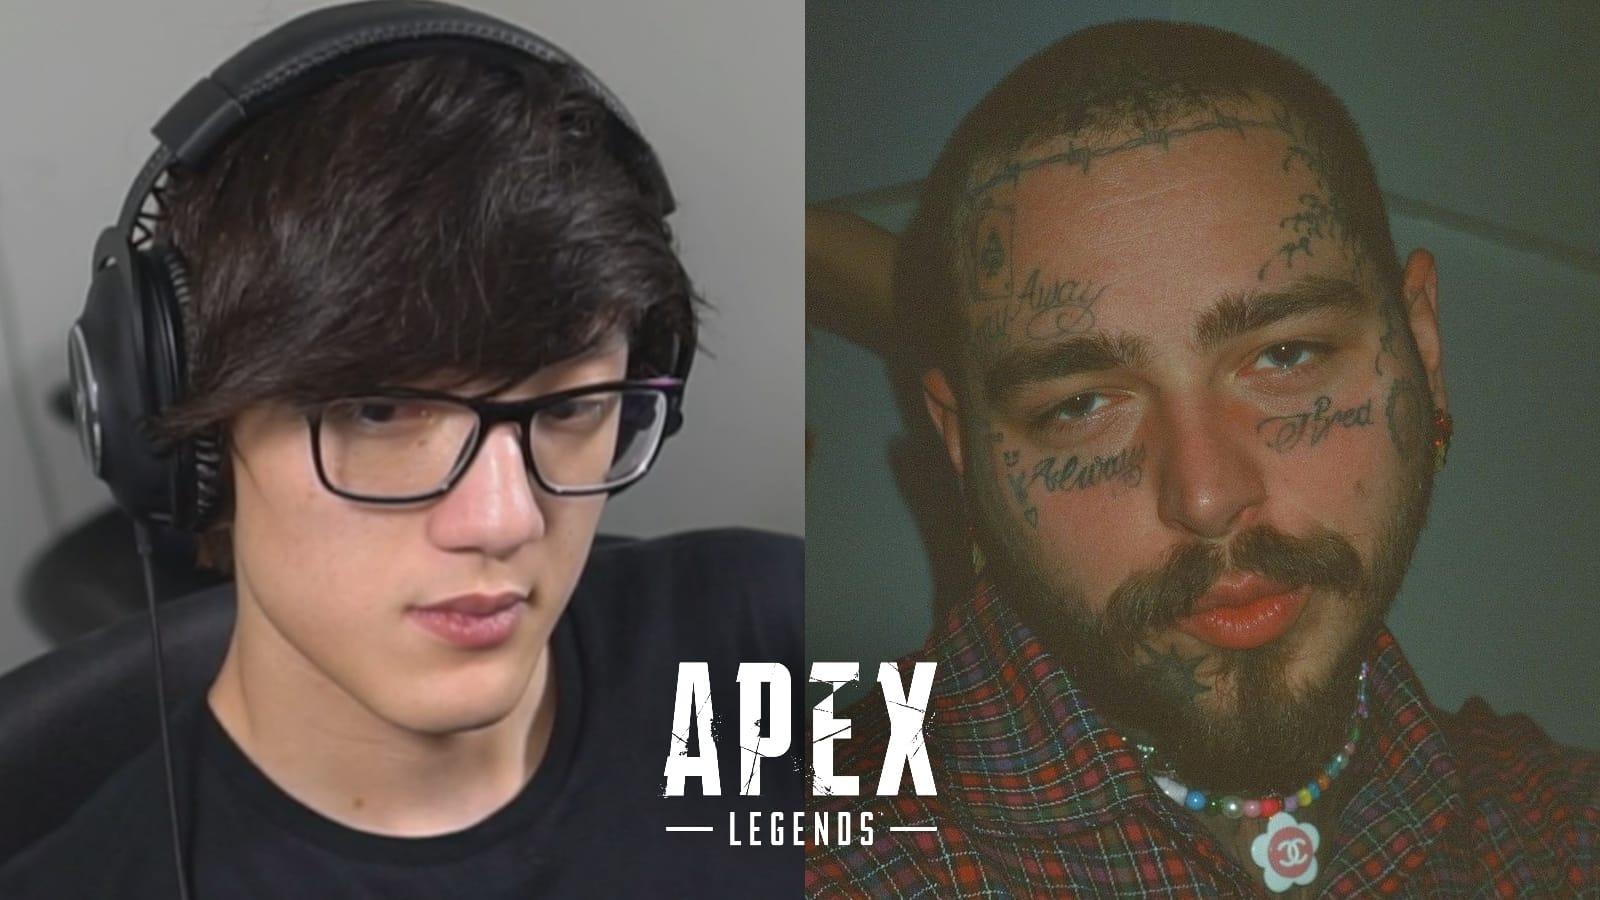 iitztimmy and post malone with apex legends logo in middle